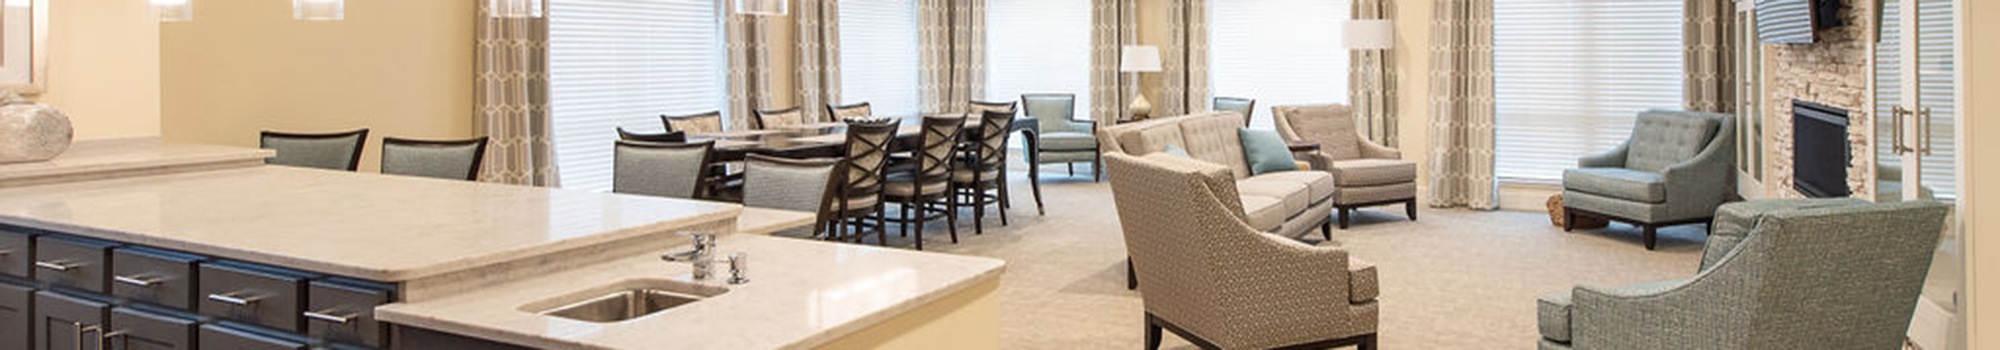 Assisted Living Facility in Chicago Artis Senior Living Lakeview